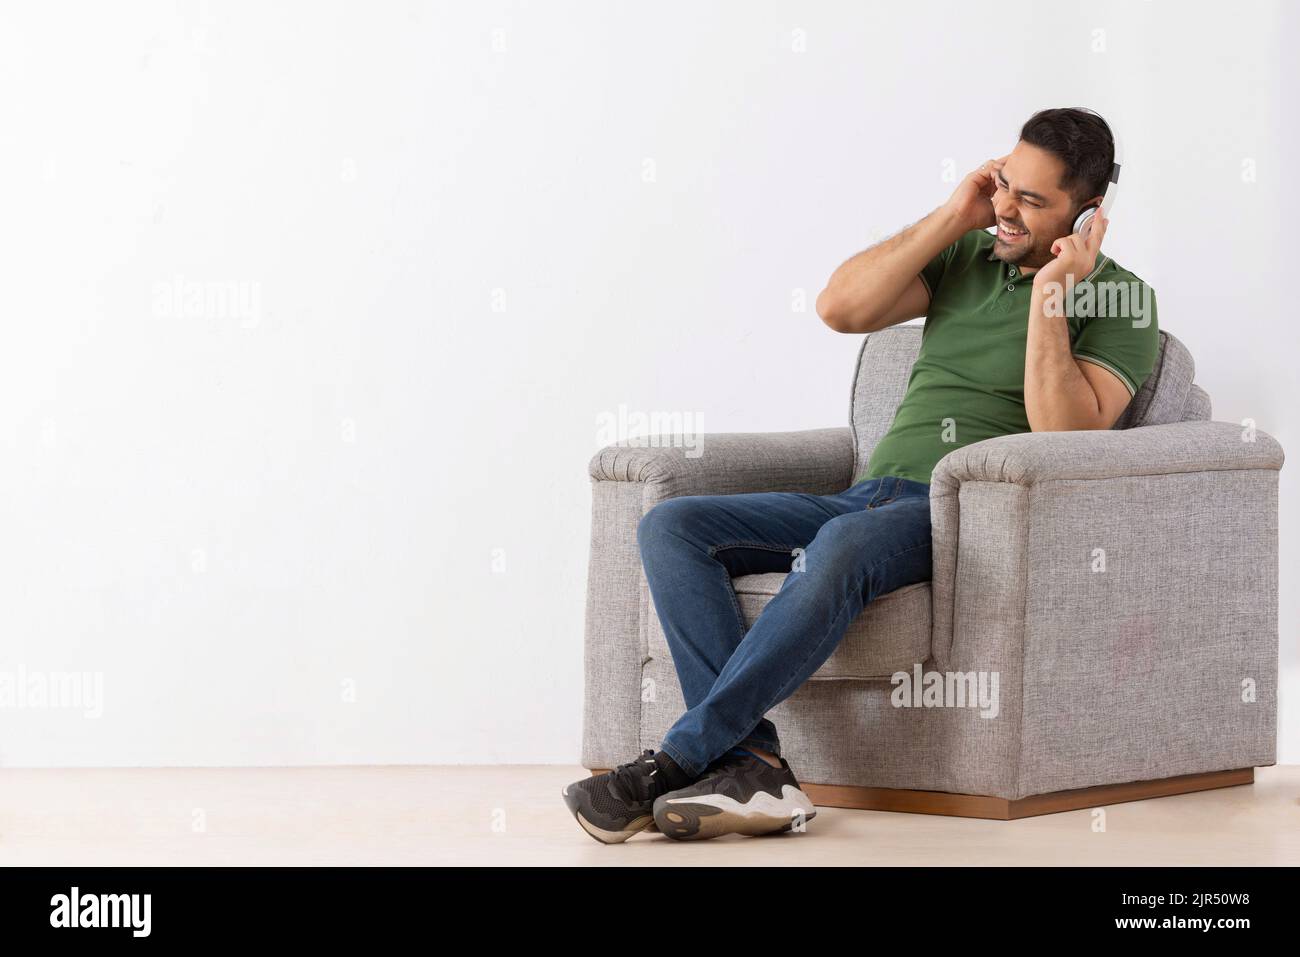 Young man listening music on headphones and having fun while sitting on sofa Stock Photo